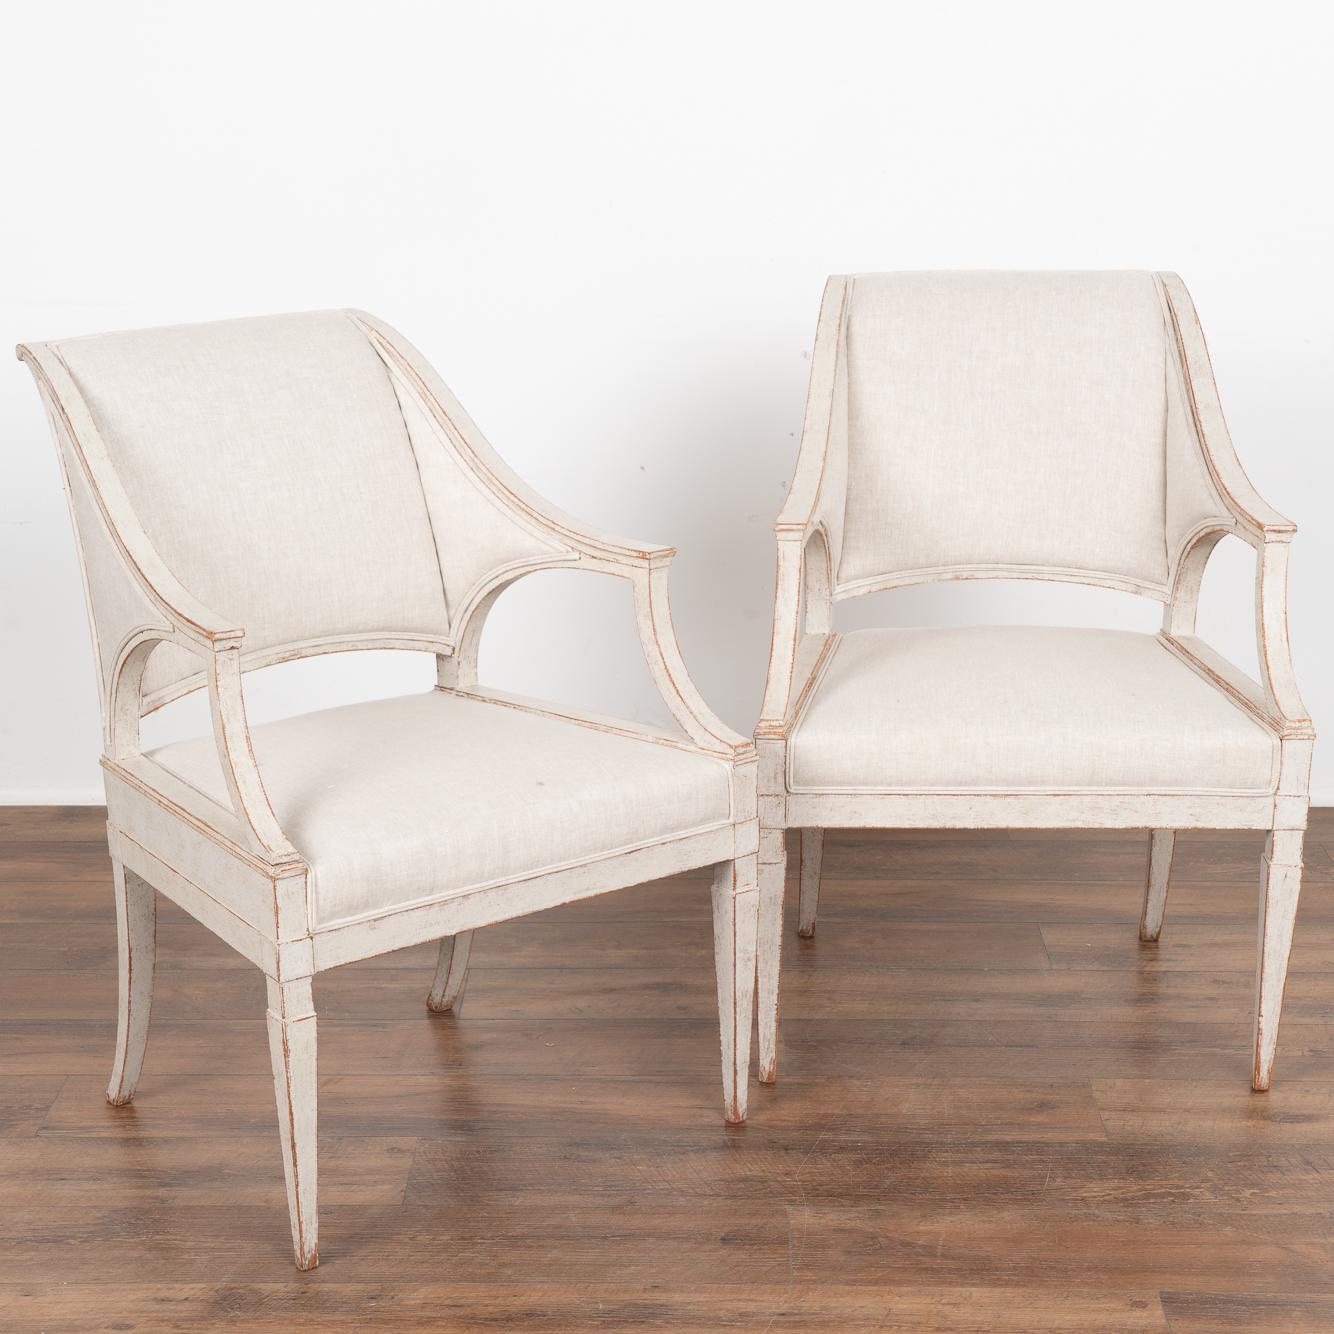 Linen Set of Four Swedish Gustavian White Painted Arm Chairs, circa 1820-40